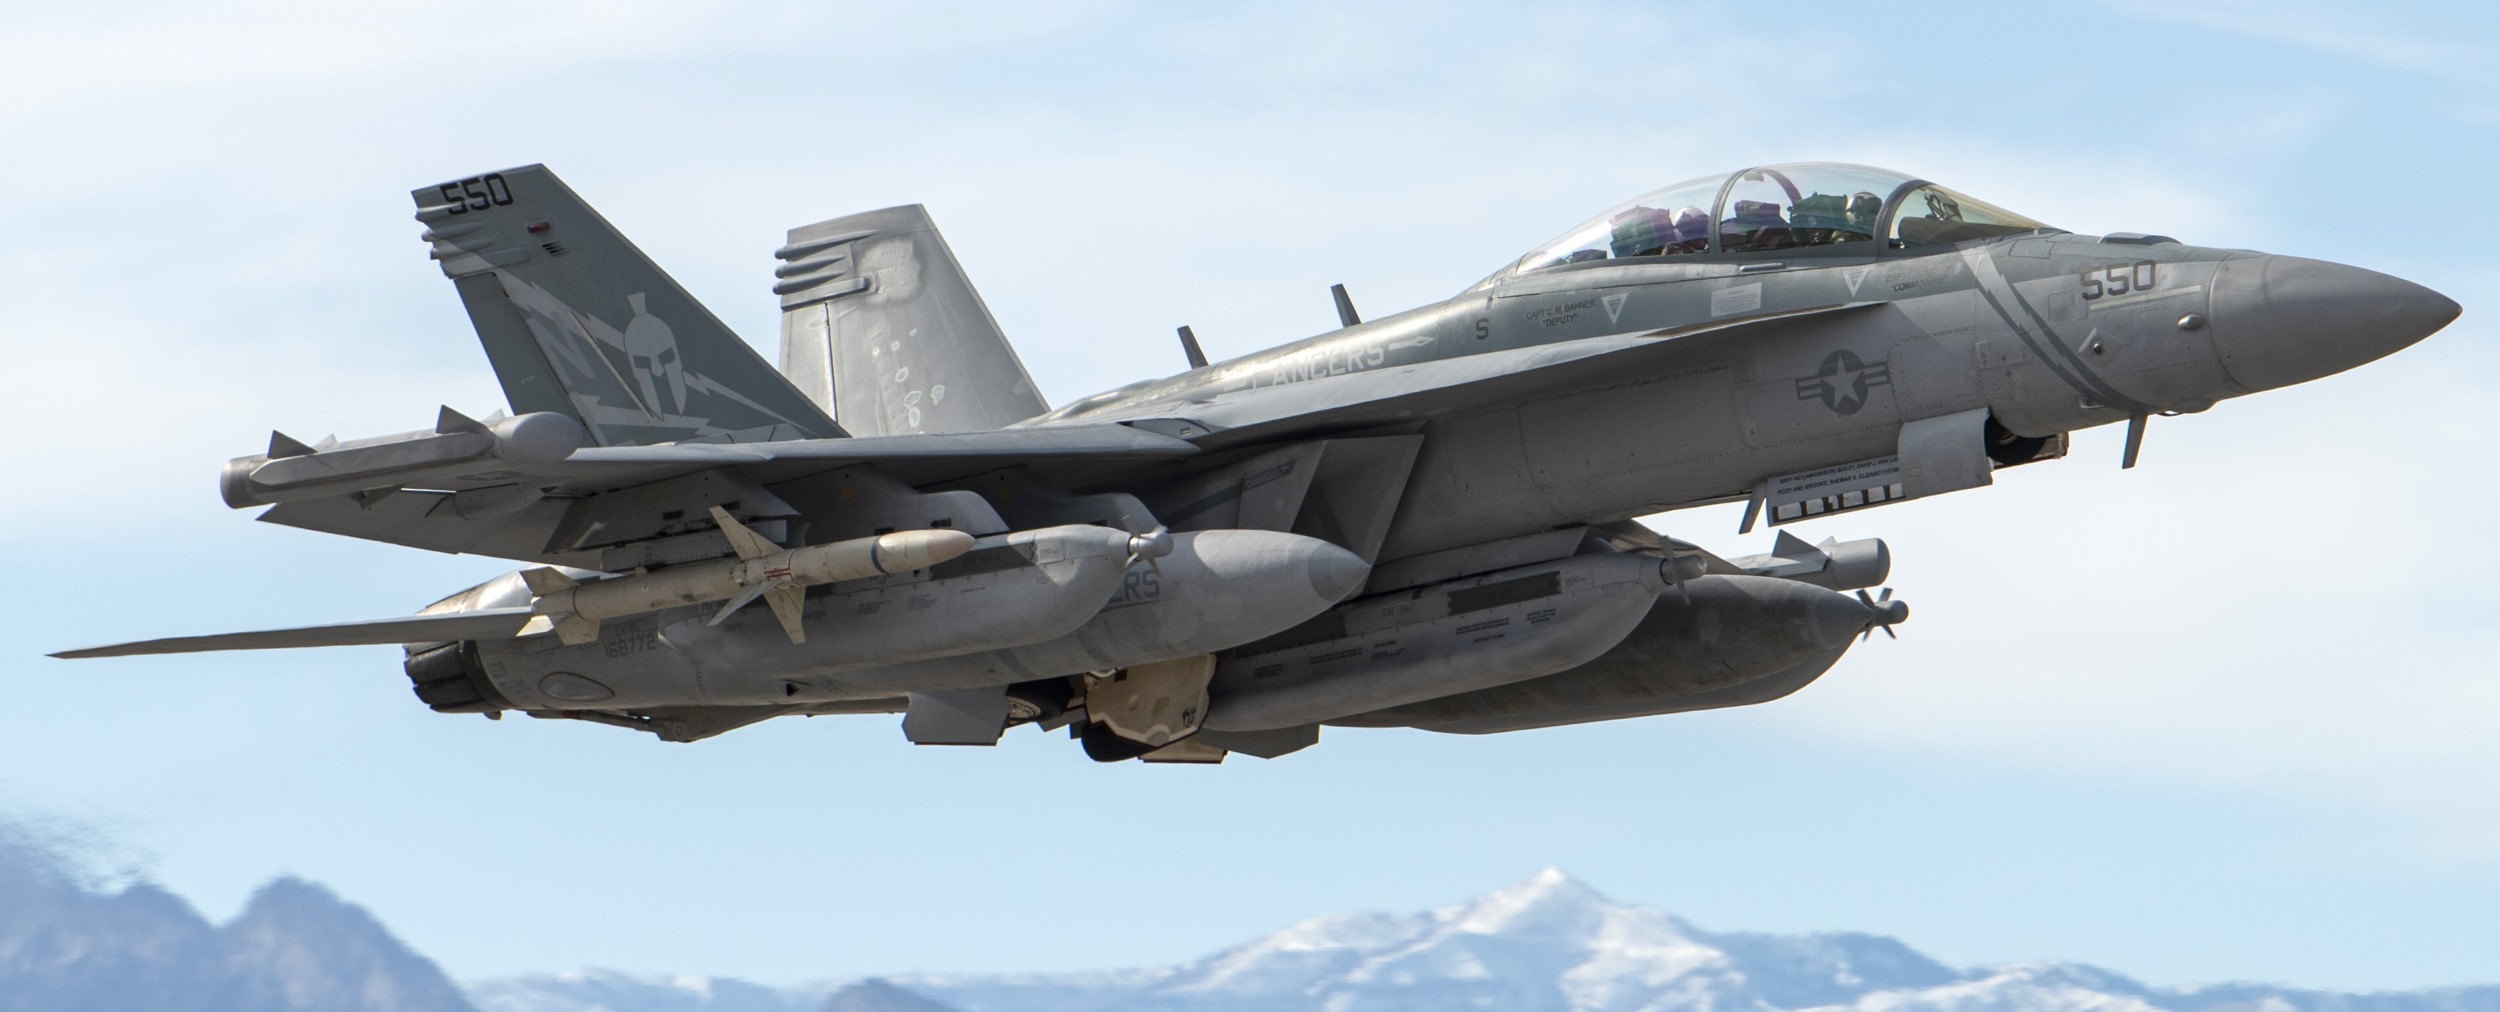 vaq-131 lancers electronic attack squadron vaqron us navy boeing ea-18g growler nellis afb nevada red flag exercise 22